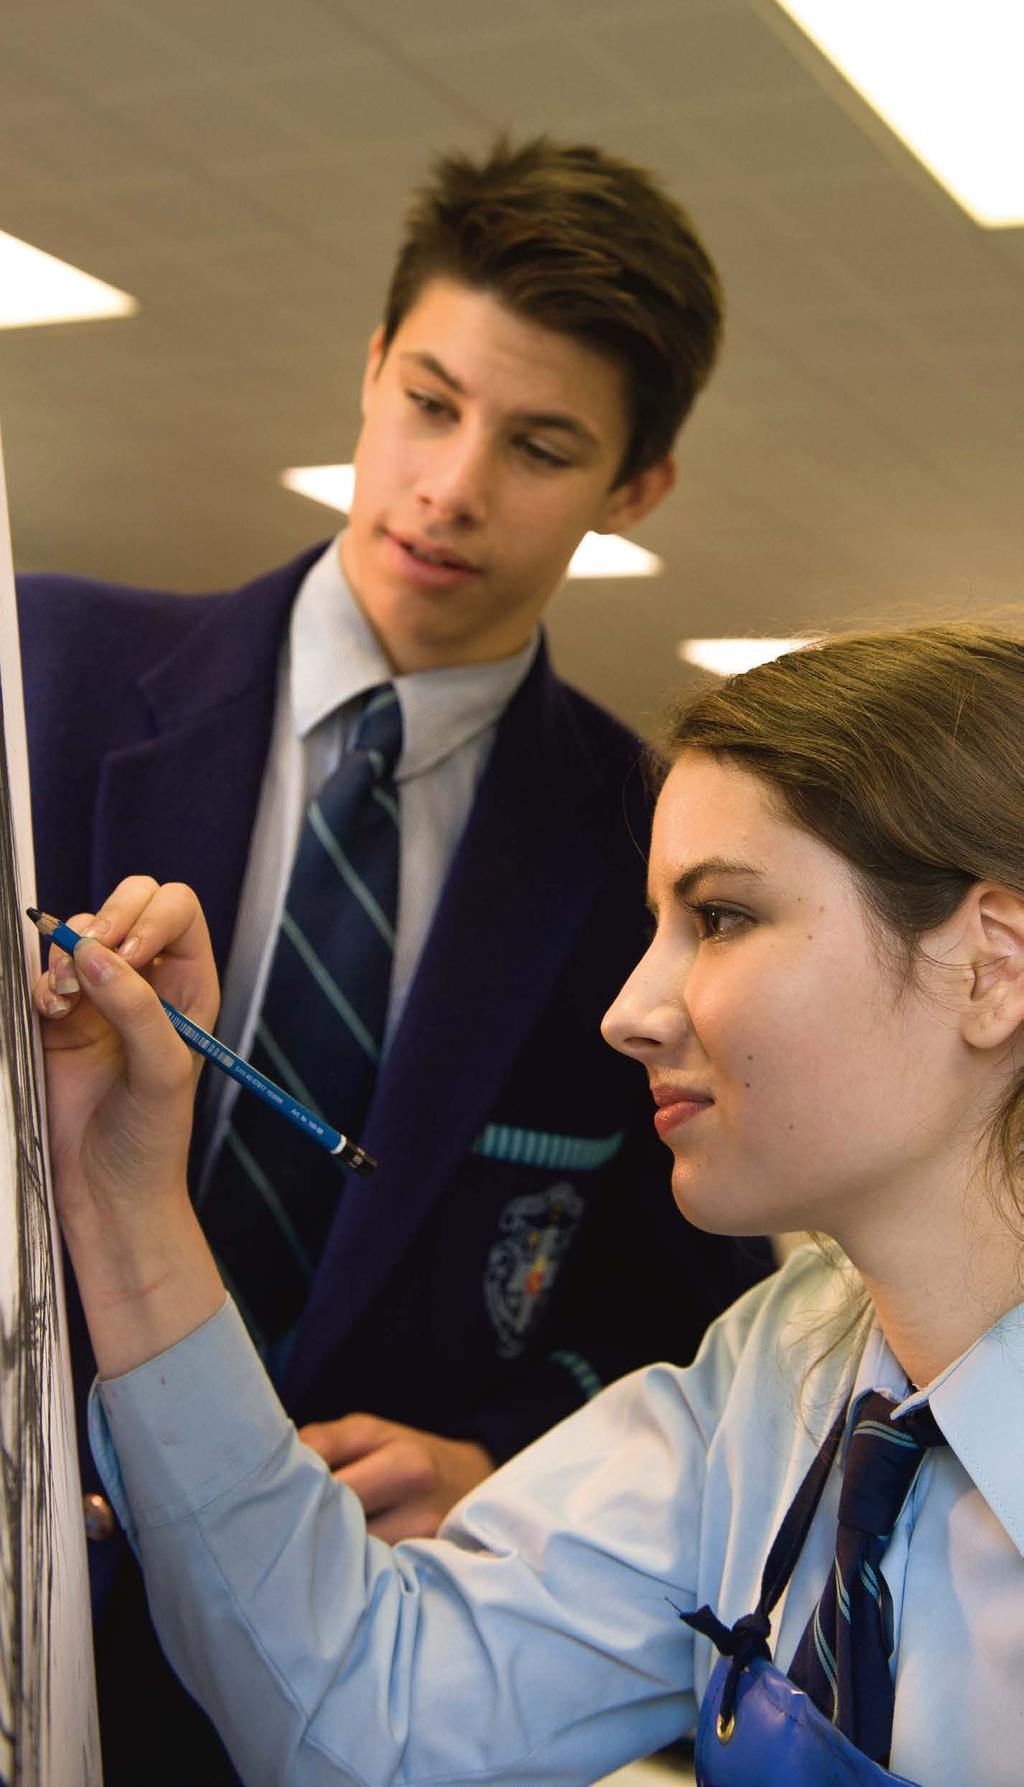 Six Dimensions 1 2 3 4 5 6 FAITH FORMATION & MARIST MISSION Goal 1: To develop a relevant and living Catholic ethos in the Marist tradition as central to the culture of Sacred Heart College.